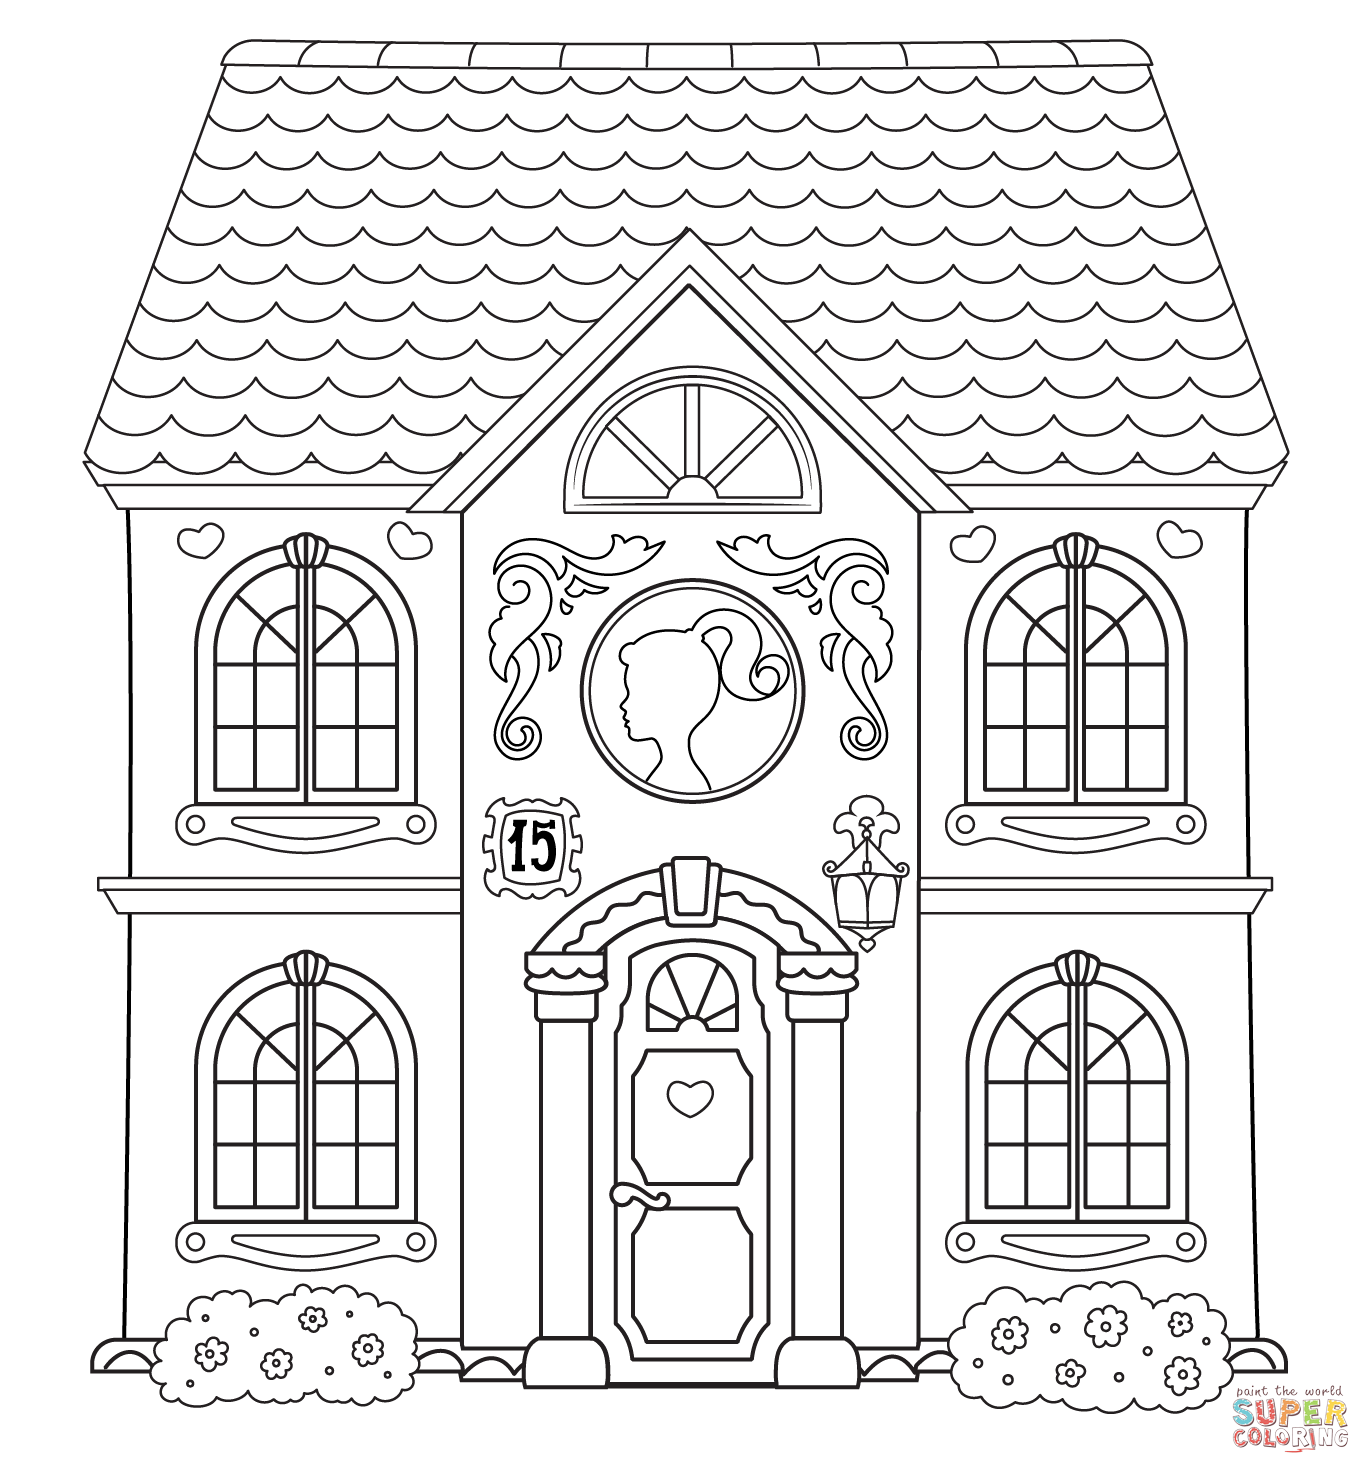 Barbie house coloring page free printable coloring pages